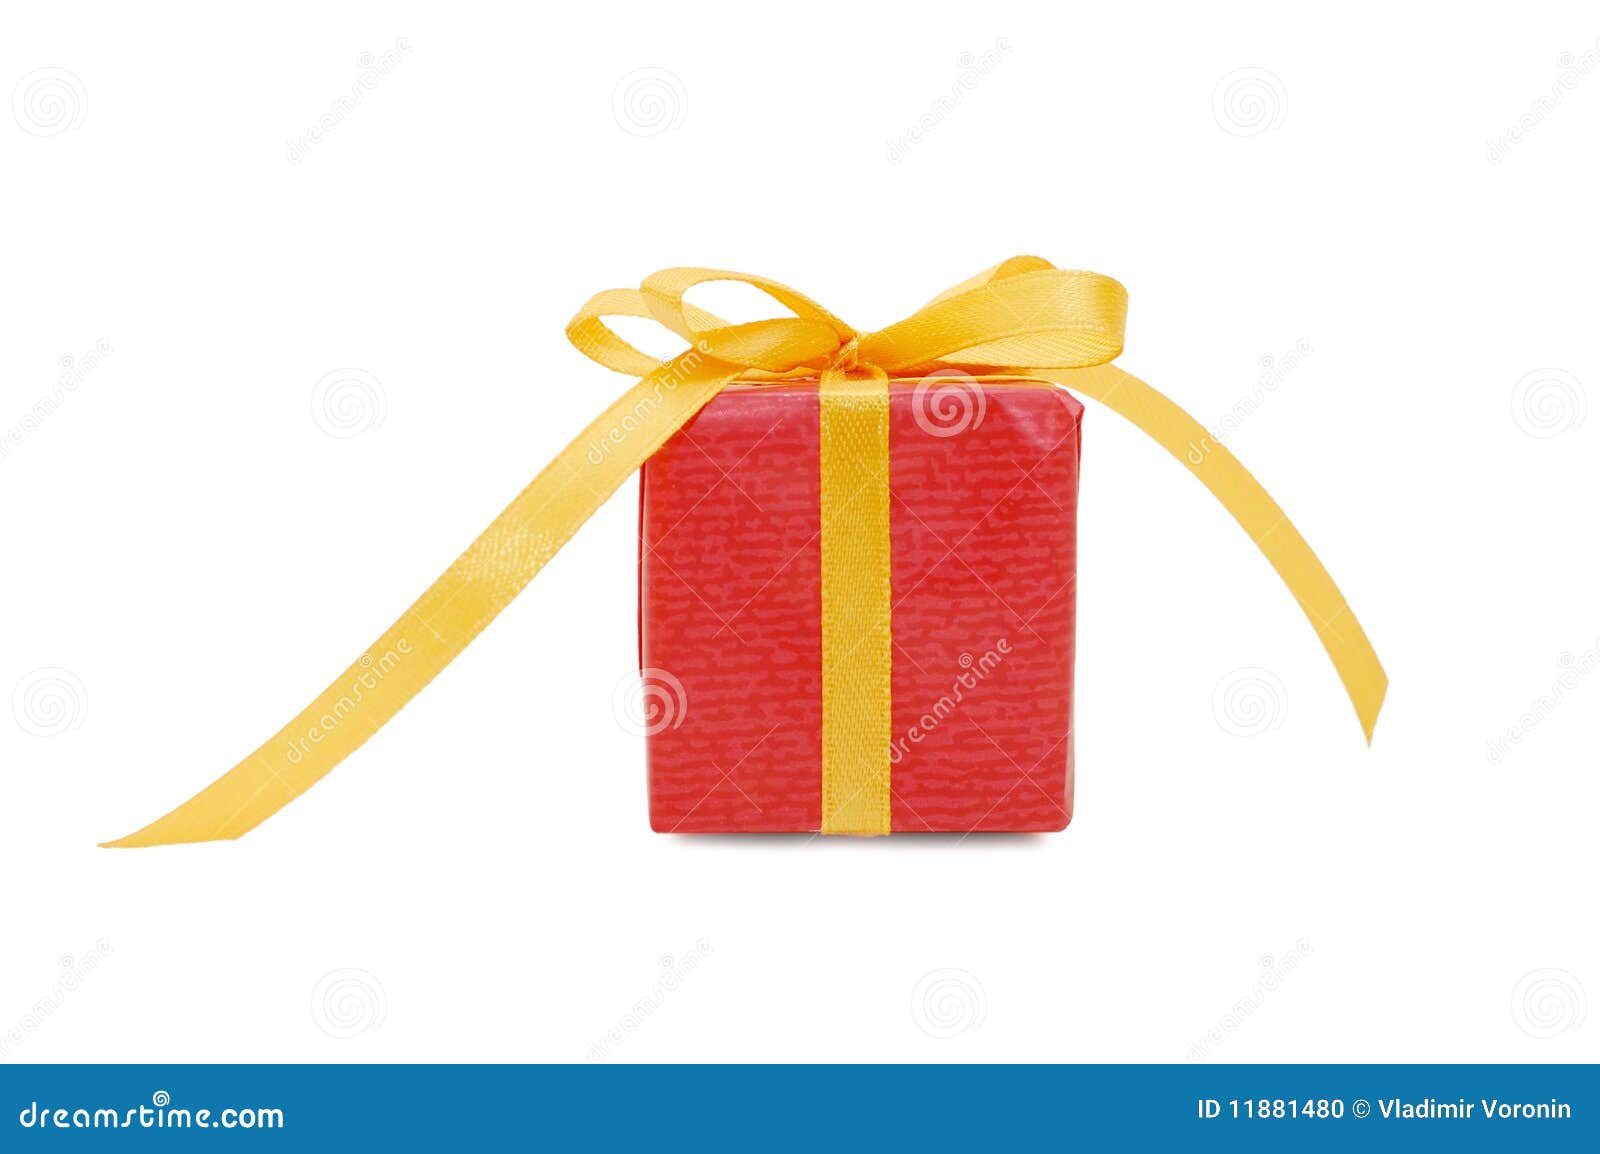 Box with gifts isolated on white background